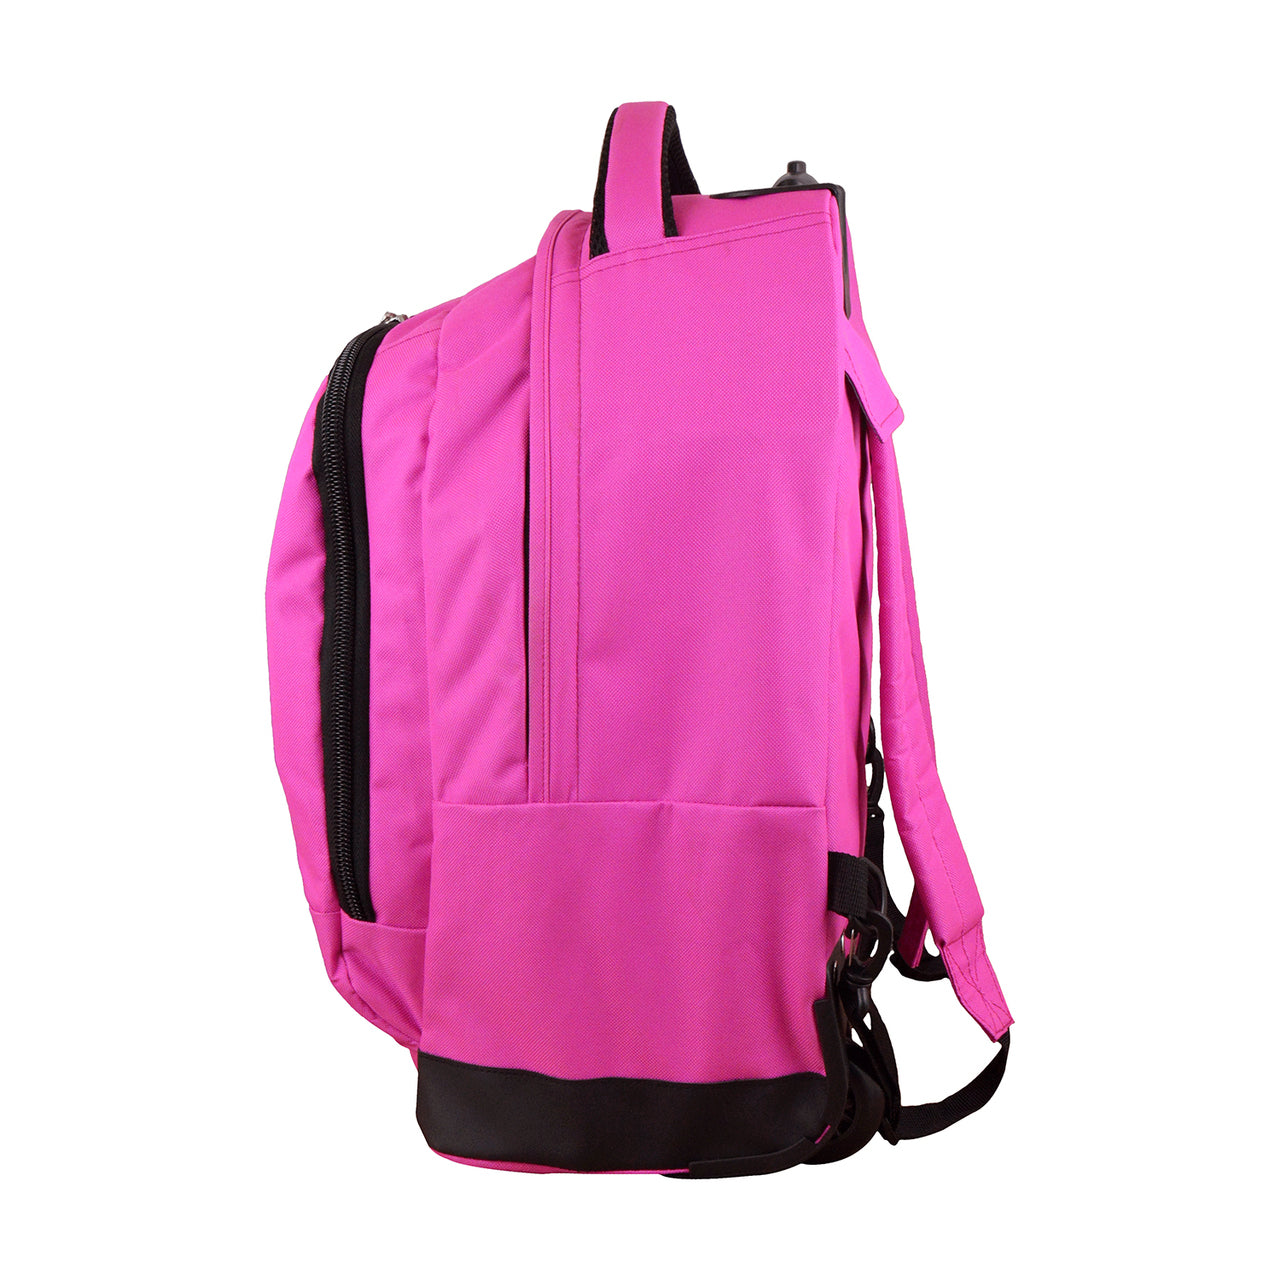 St Louis Cardinals Premium Wheeled Backpack in Pink